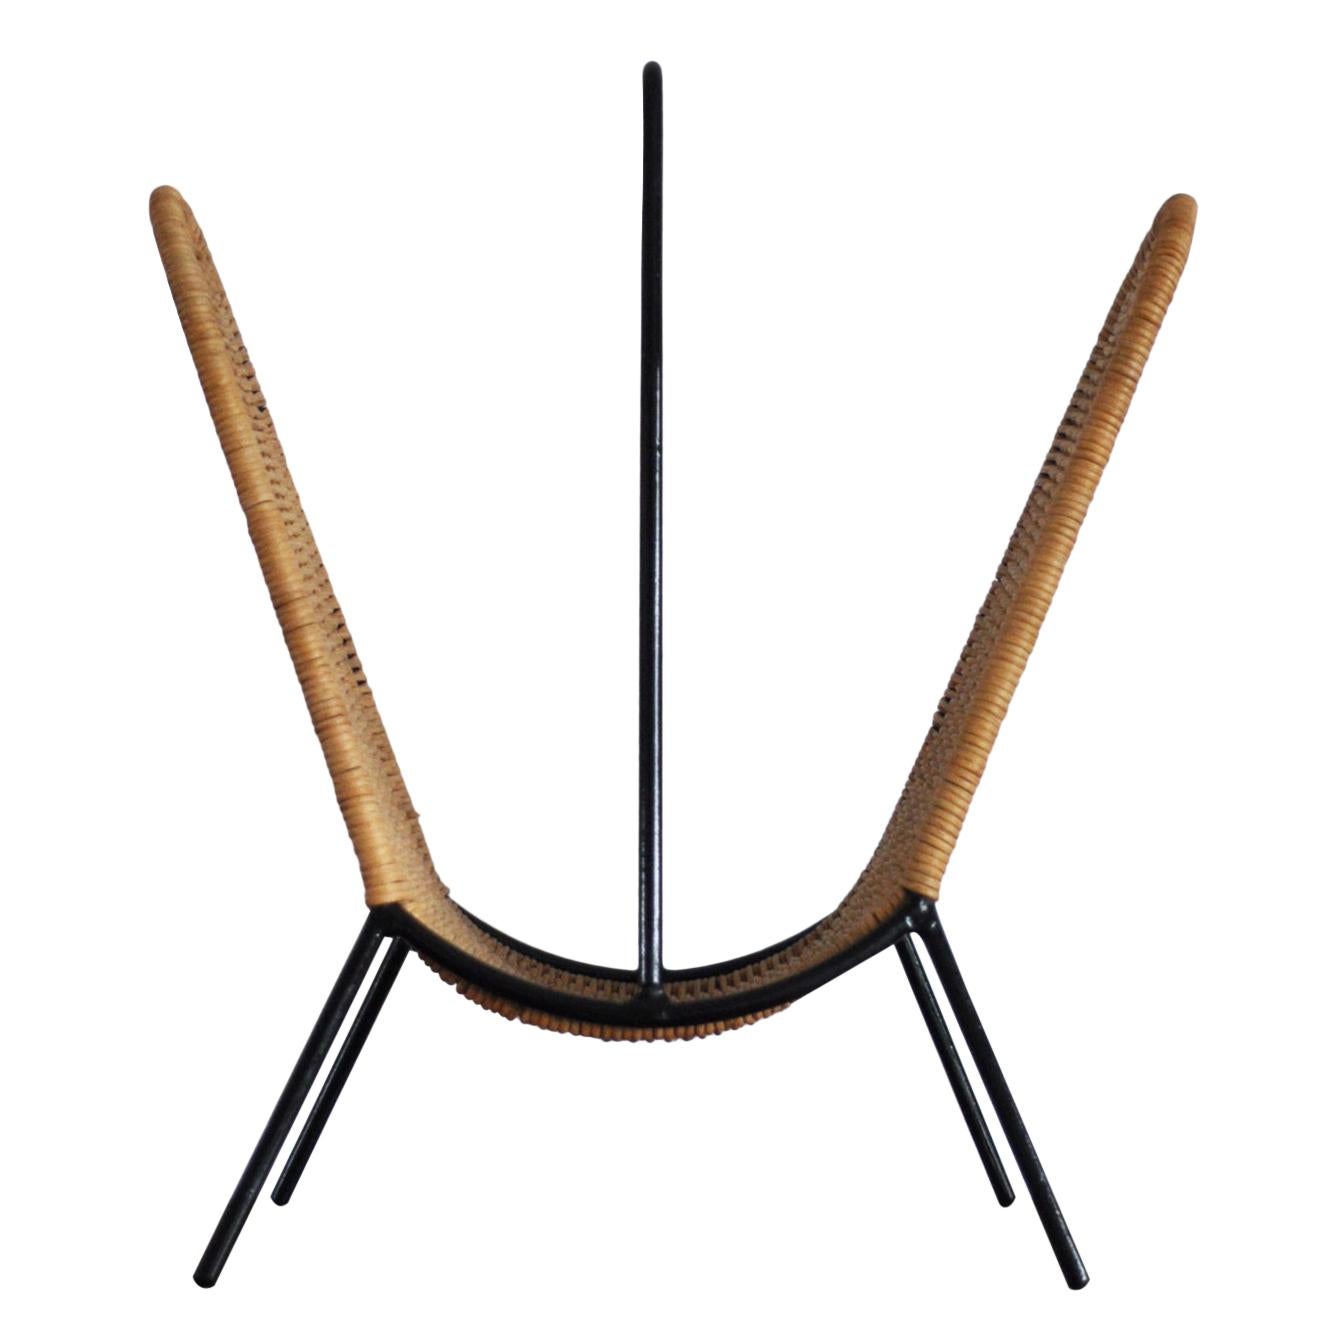 Danish Modern Rattan Magazine Rack attributed to Carl Auböck, 1960s For Sale